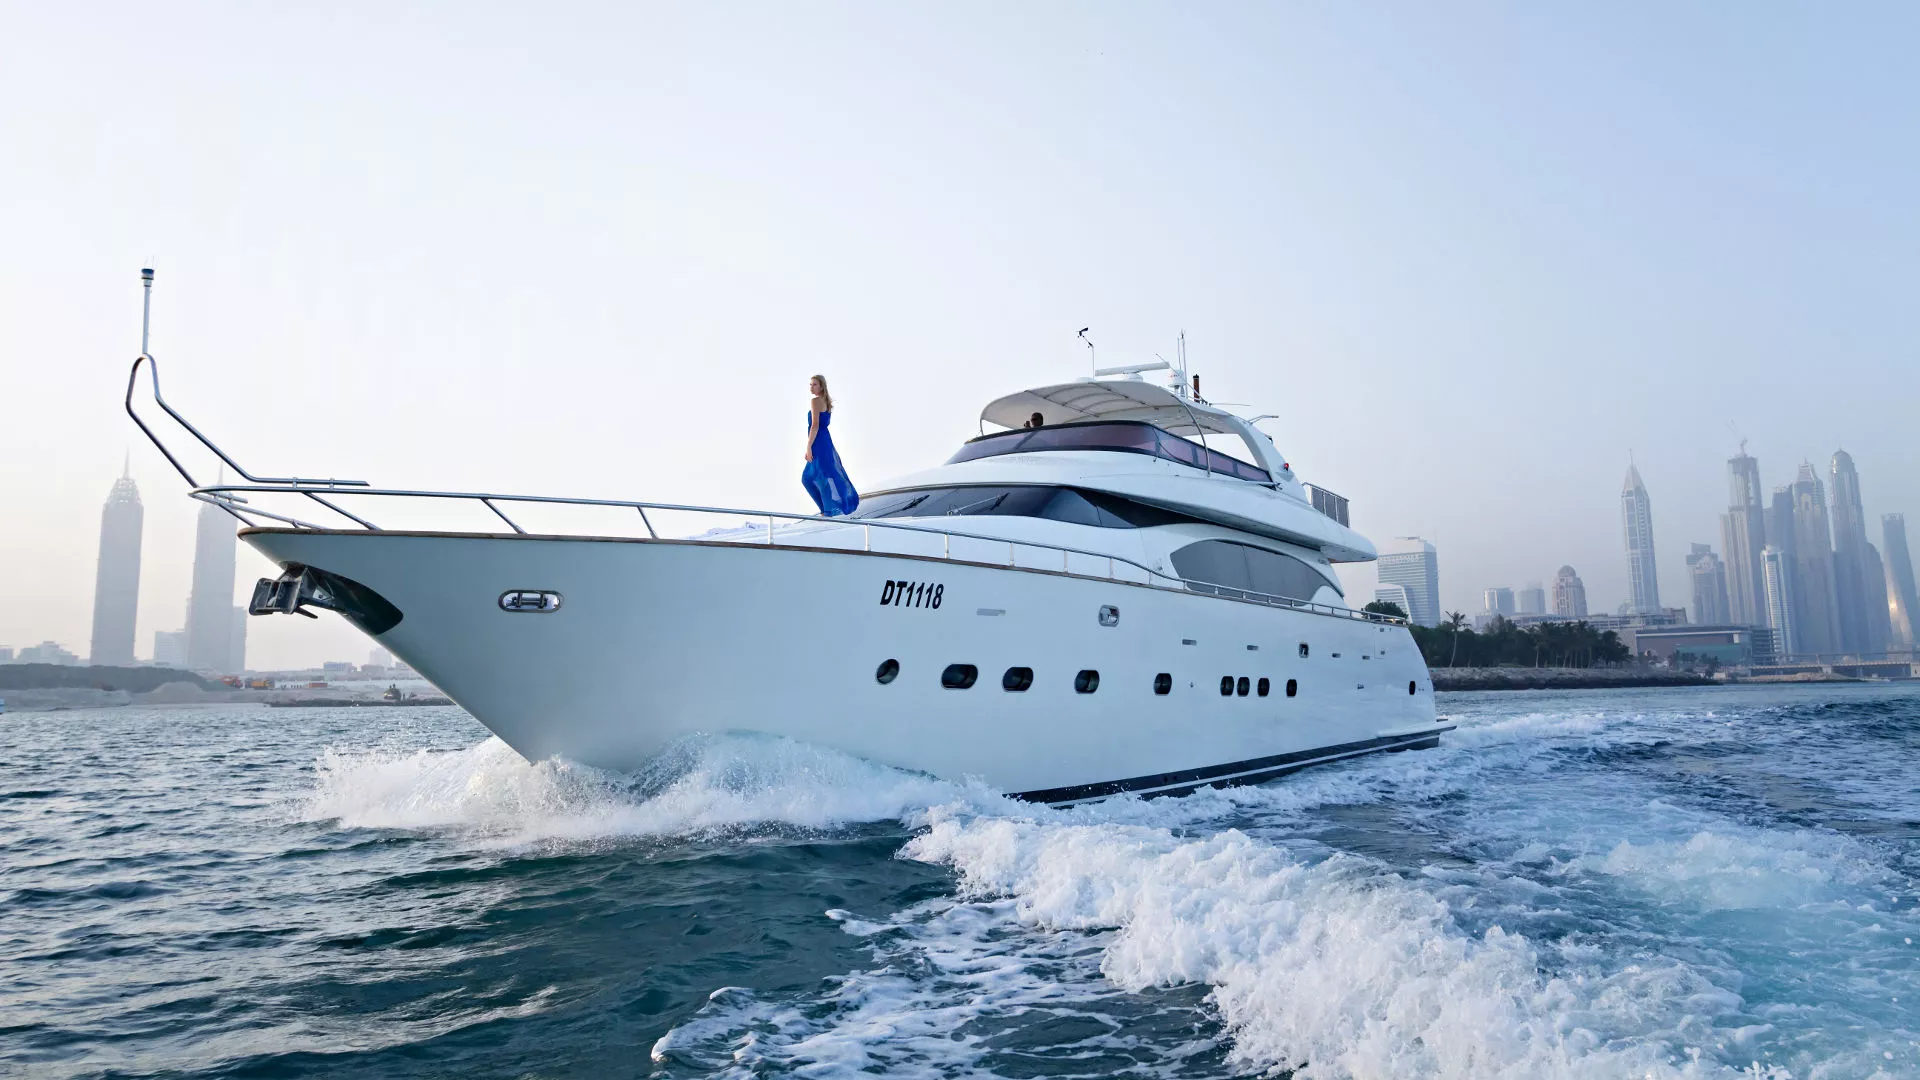 Xclusive Yachts Rental Dubai in United Arab Emirates, Middle East | Yachting - Rated 4.2